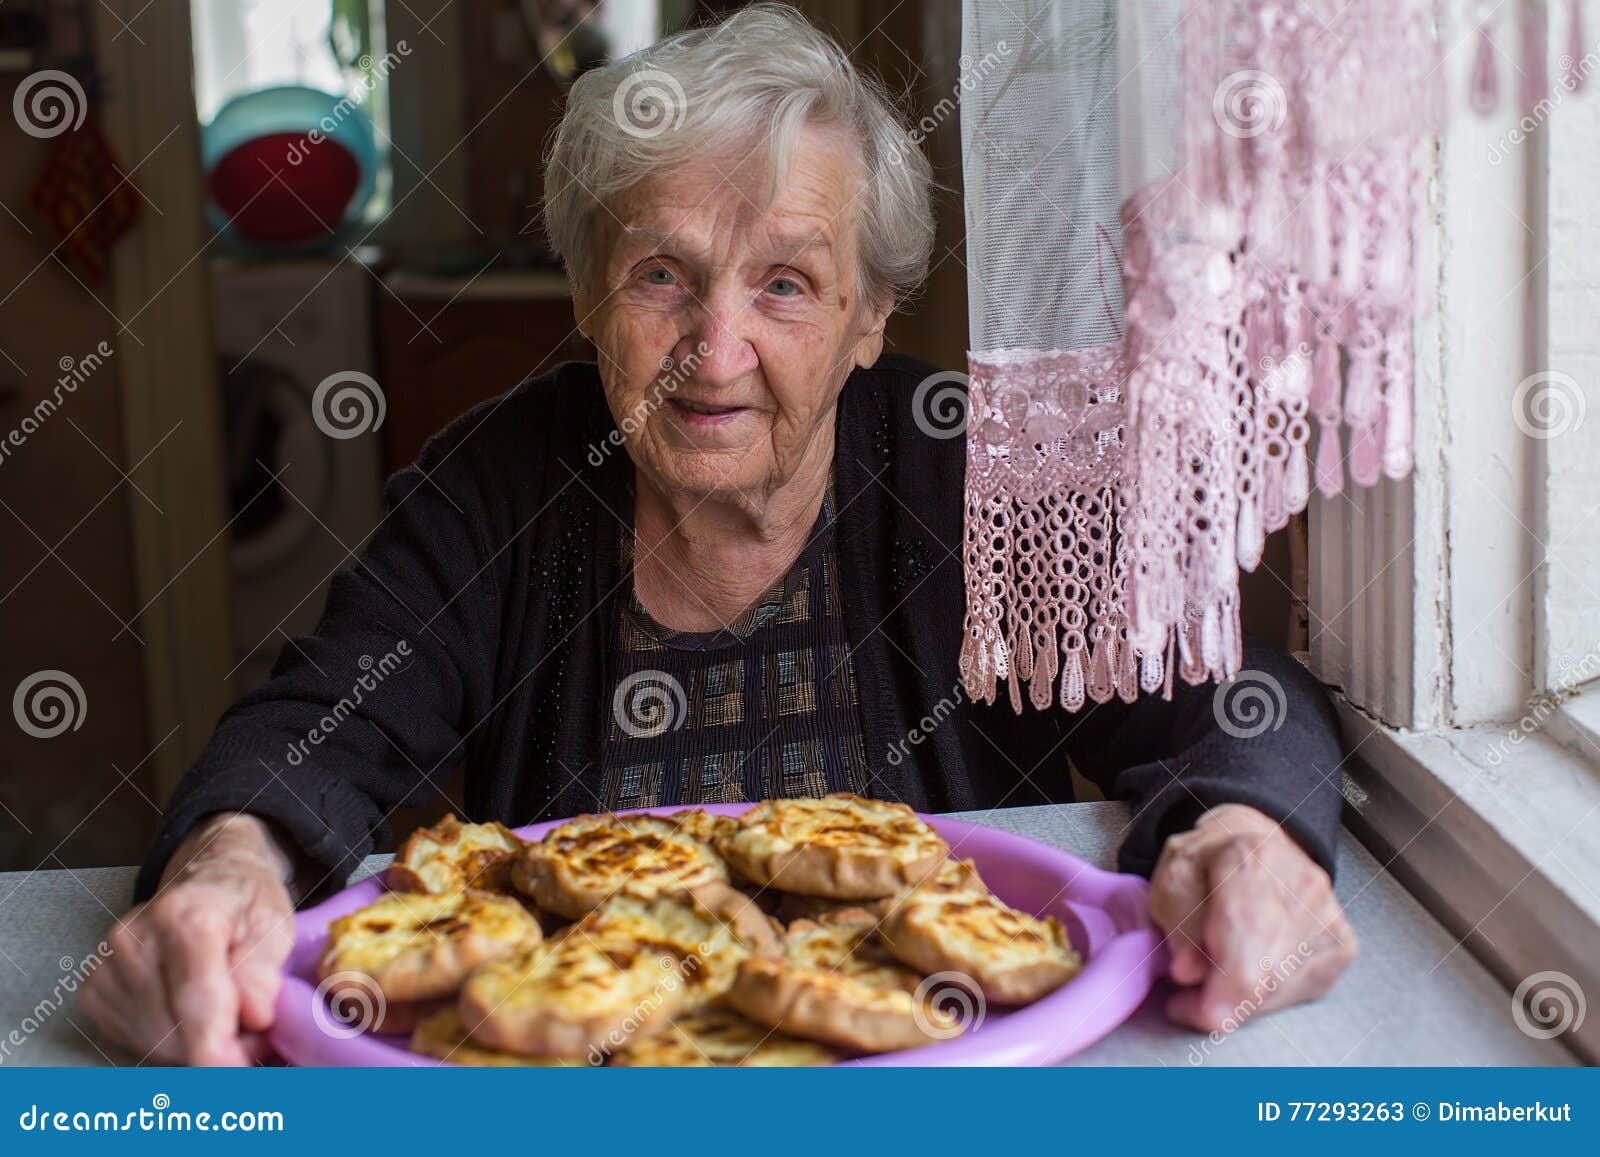 Grandmother with Pies in the Kitchen. Happy. Stock Image - Image of ...